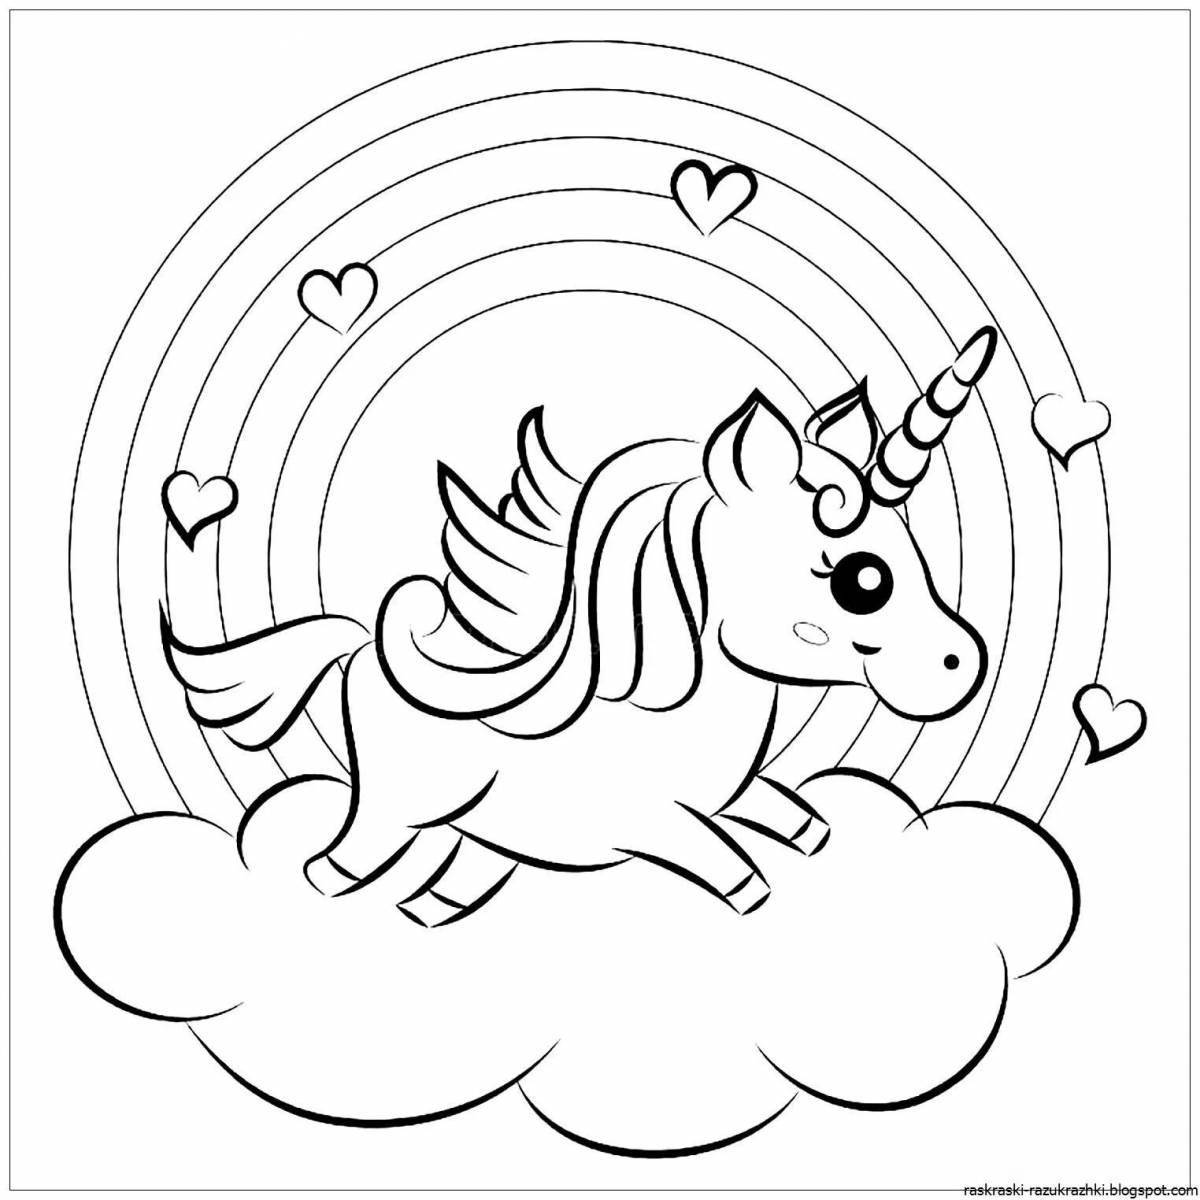 Tempting coloring page include unicorns